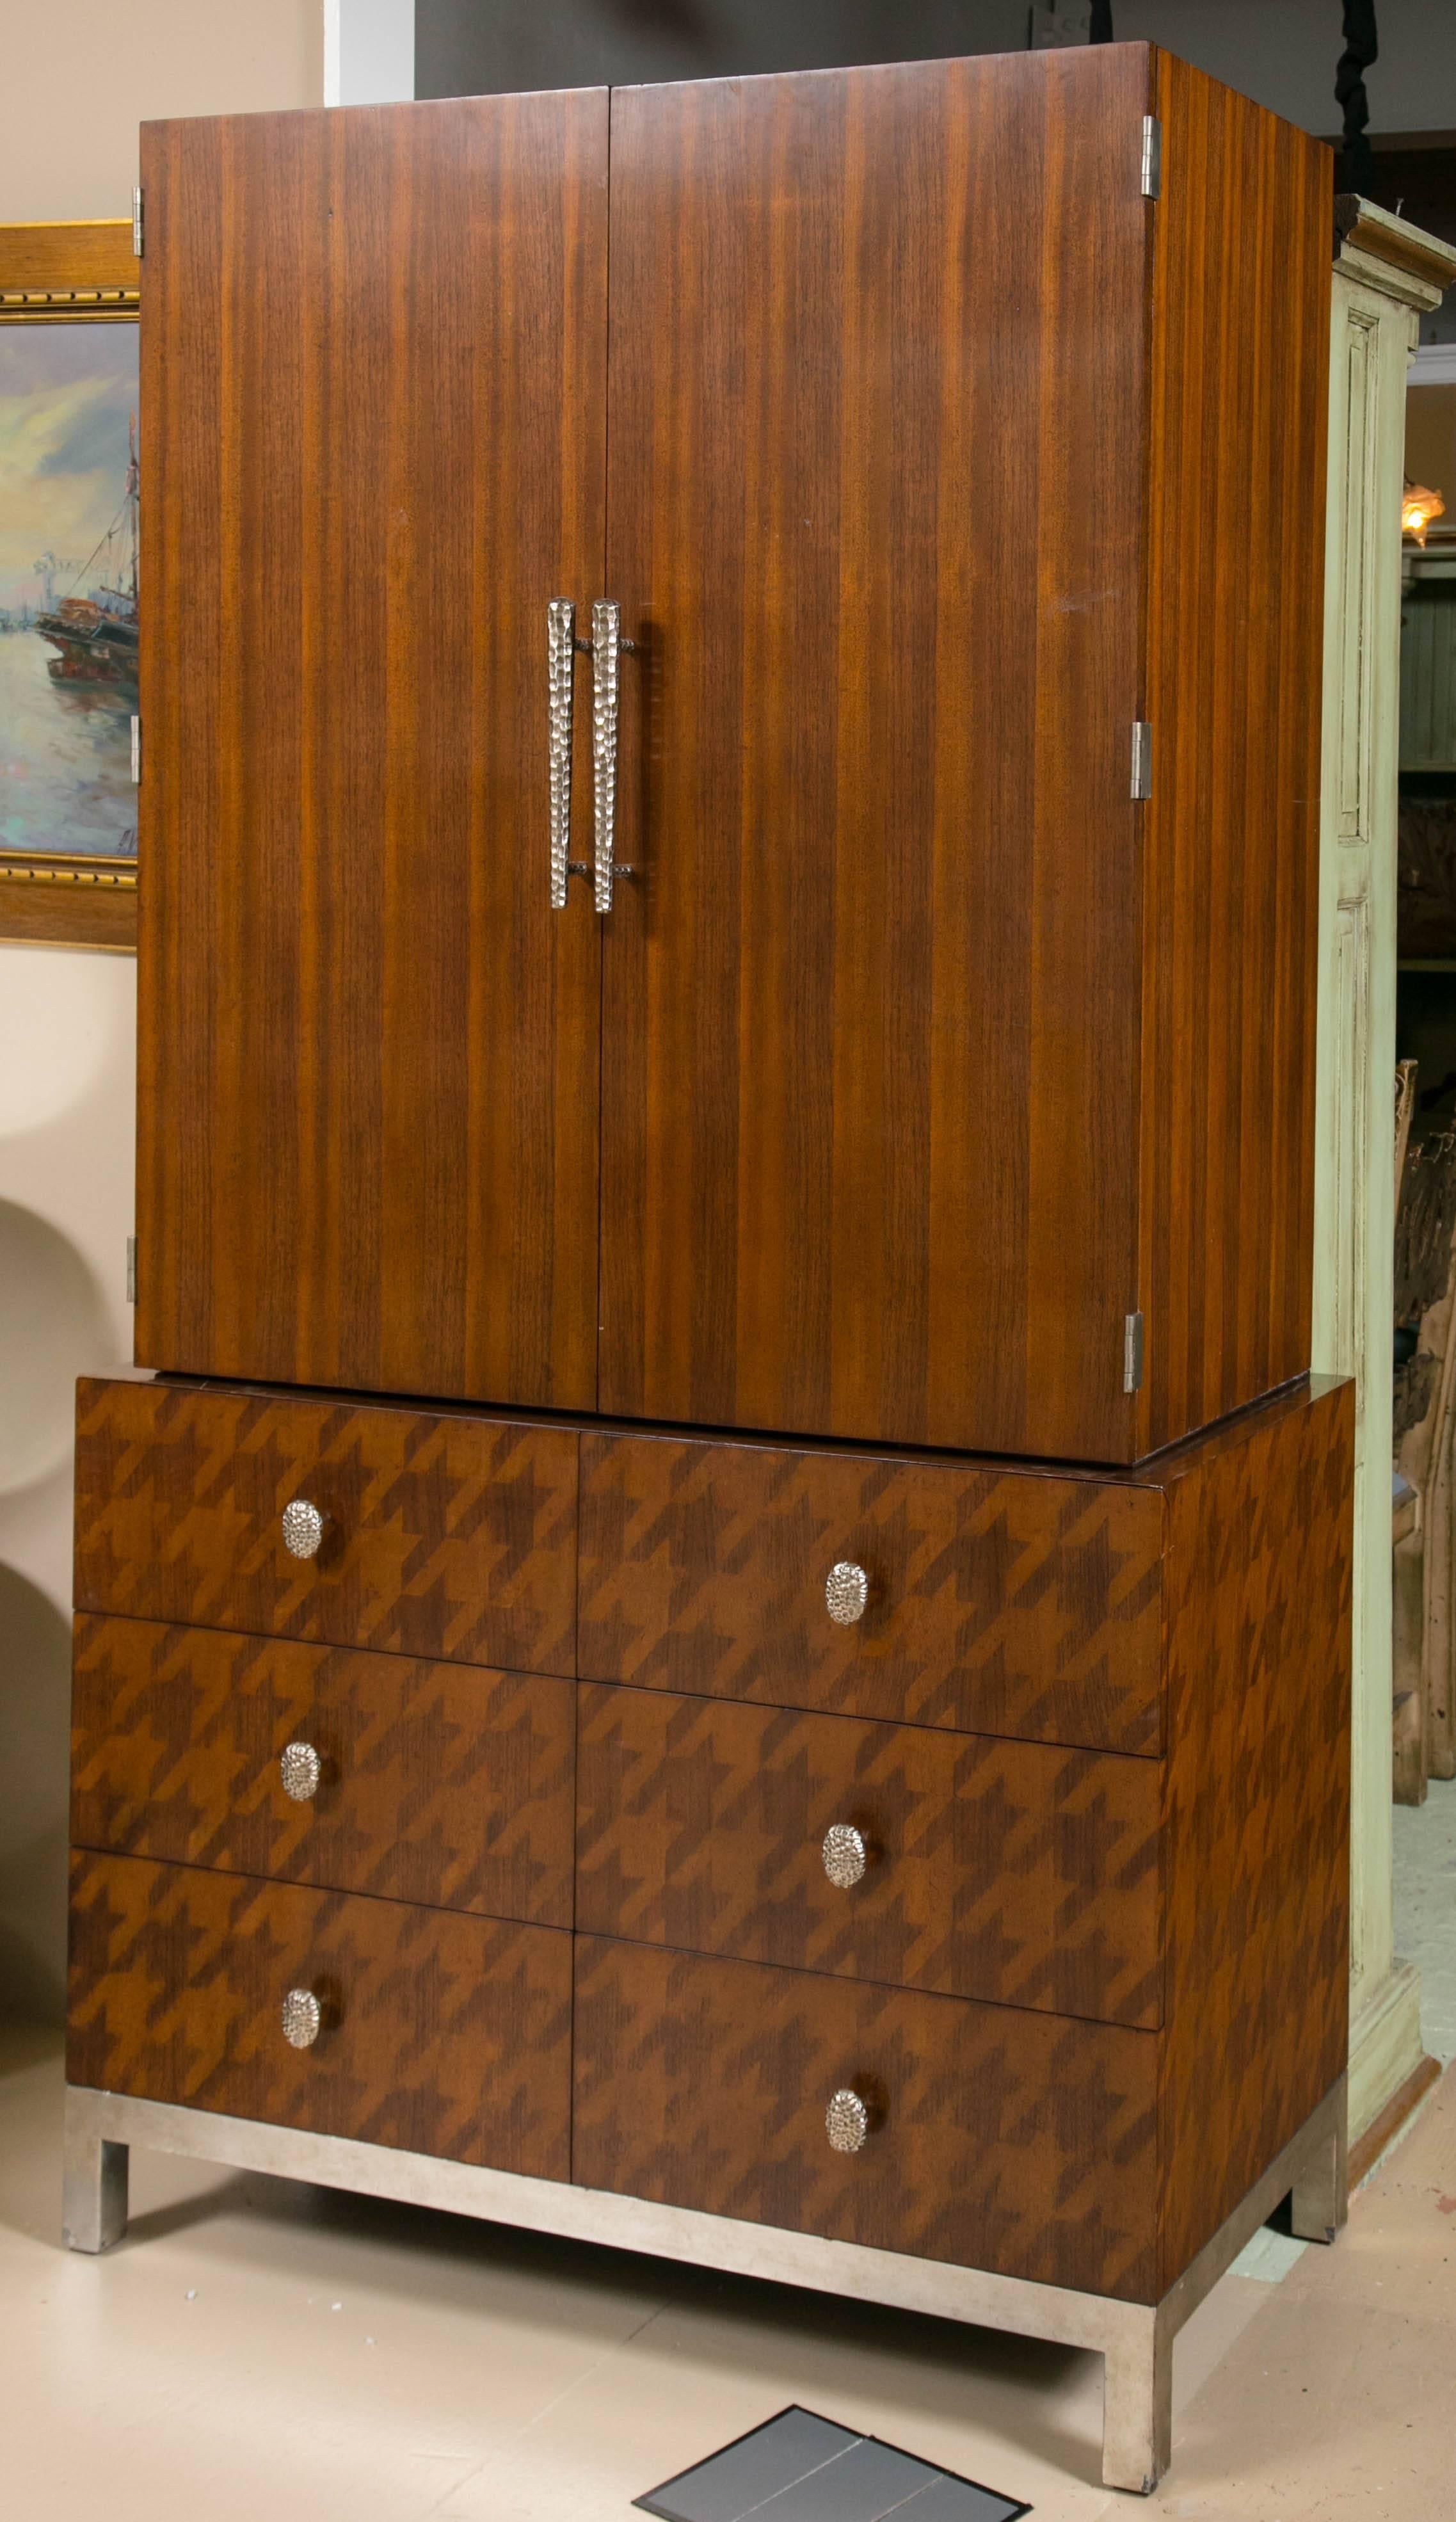 Alexander Julian for Jonathan Charles. Hitting the bar. This finely designed bar cabinet has a lower commode of three by three lined drawers on a silver base supporting an upper fabulous wine rack bar/cabinet with beveled mirror back and glass